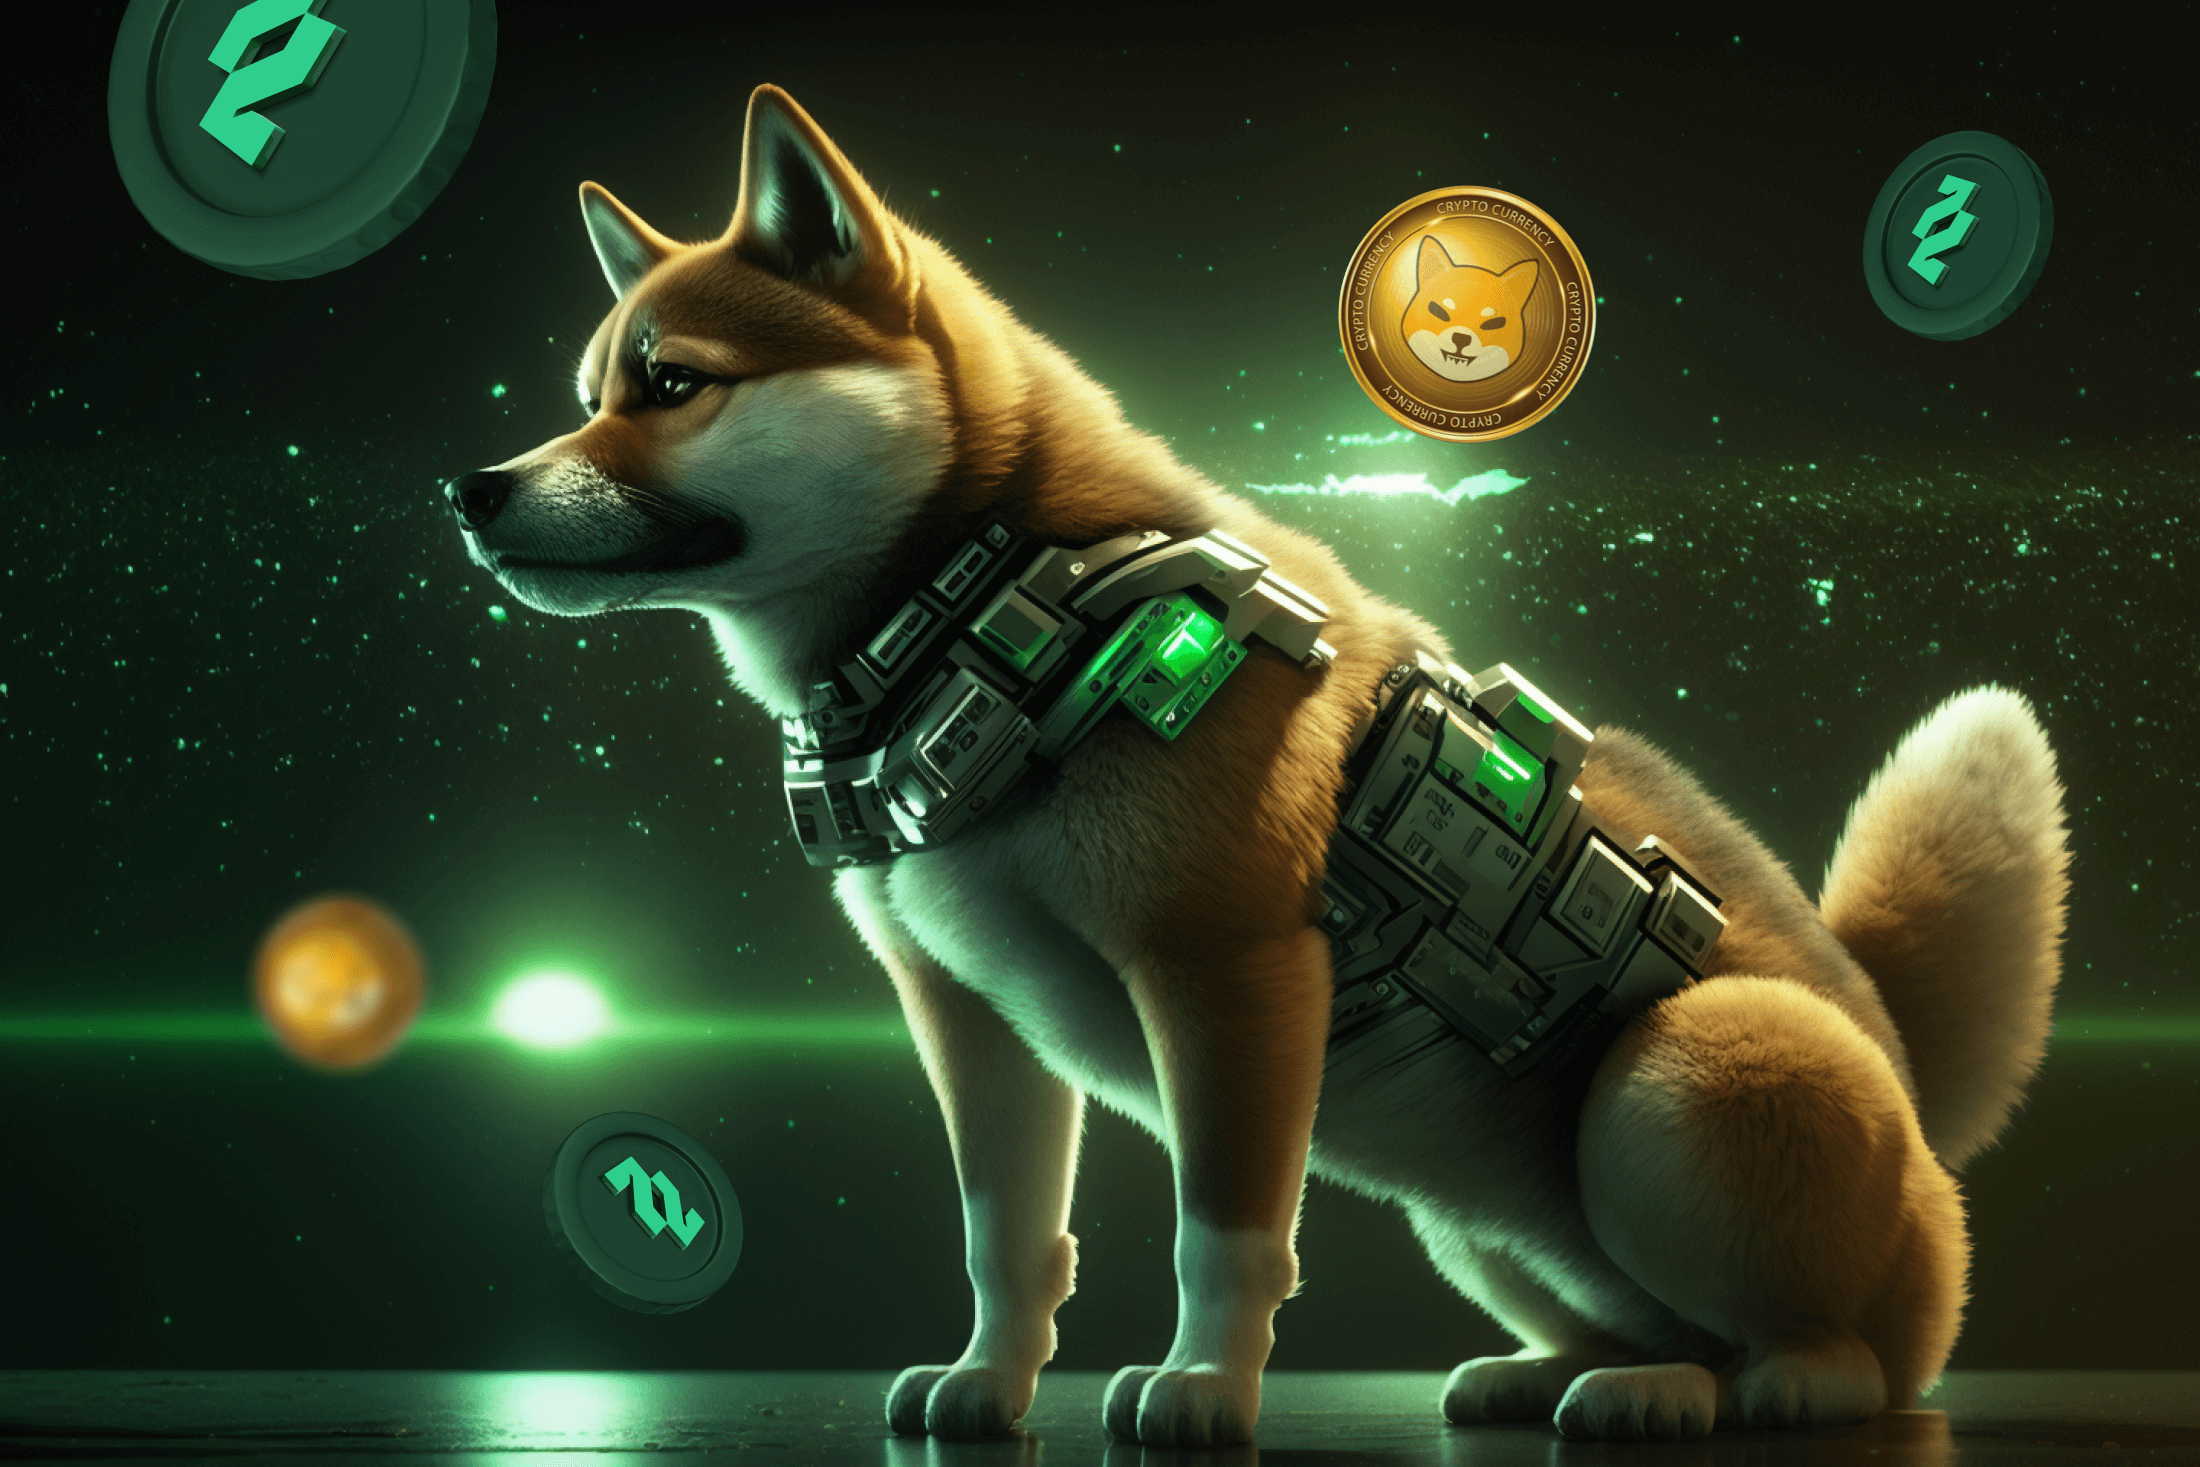 Shiba Inu and Tradecurve journey to $1B market cap a closer look